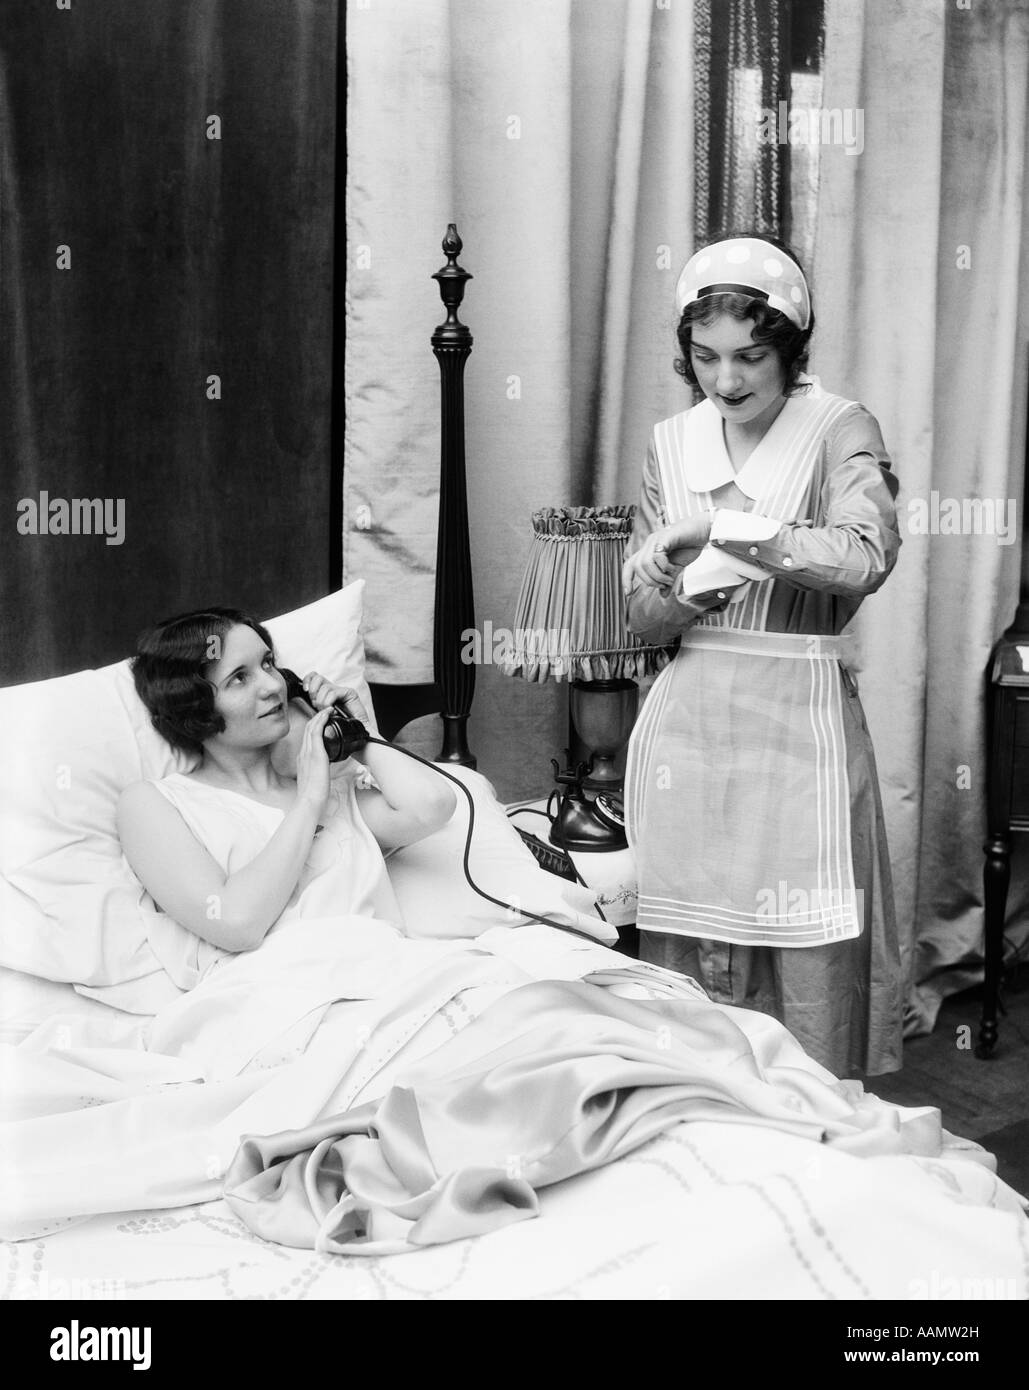 1920s 1930s TWO WOMEN IN BEDROOM MAID LOOKING AT WRIST WATCH OTHER WOMAN IN BED TALKING ON PHONE HAND HELD OVER MOUTHPIECE Stock Photo